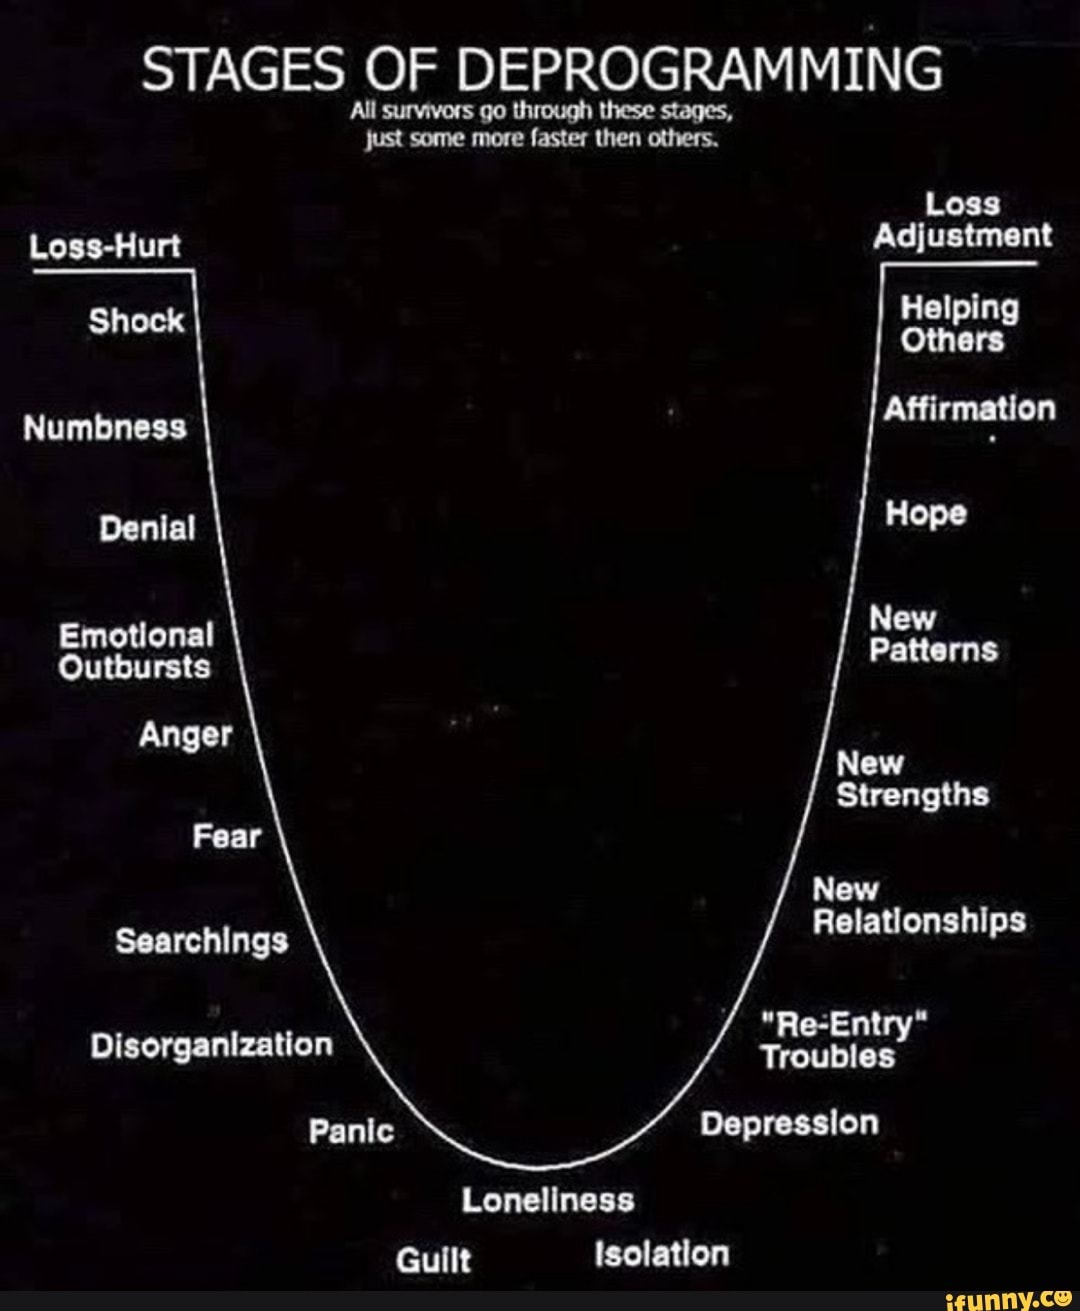 stages-of-deprogramming-all-survivors-go-through-these-stages-just